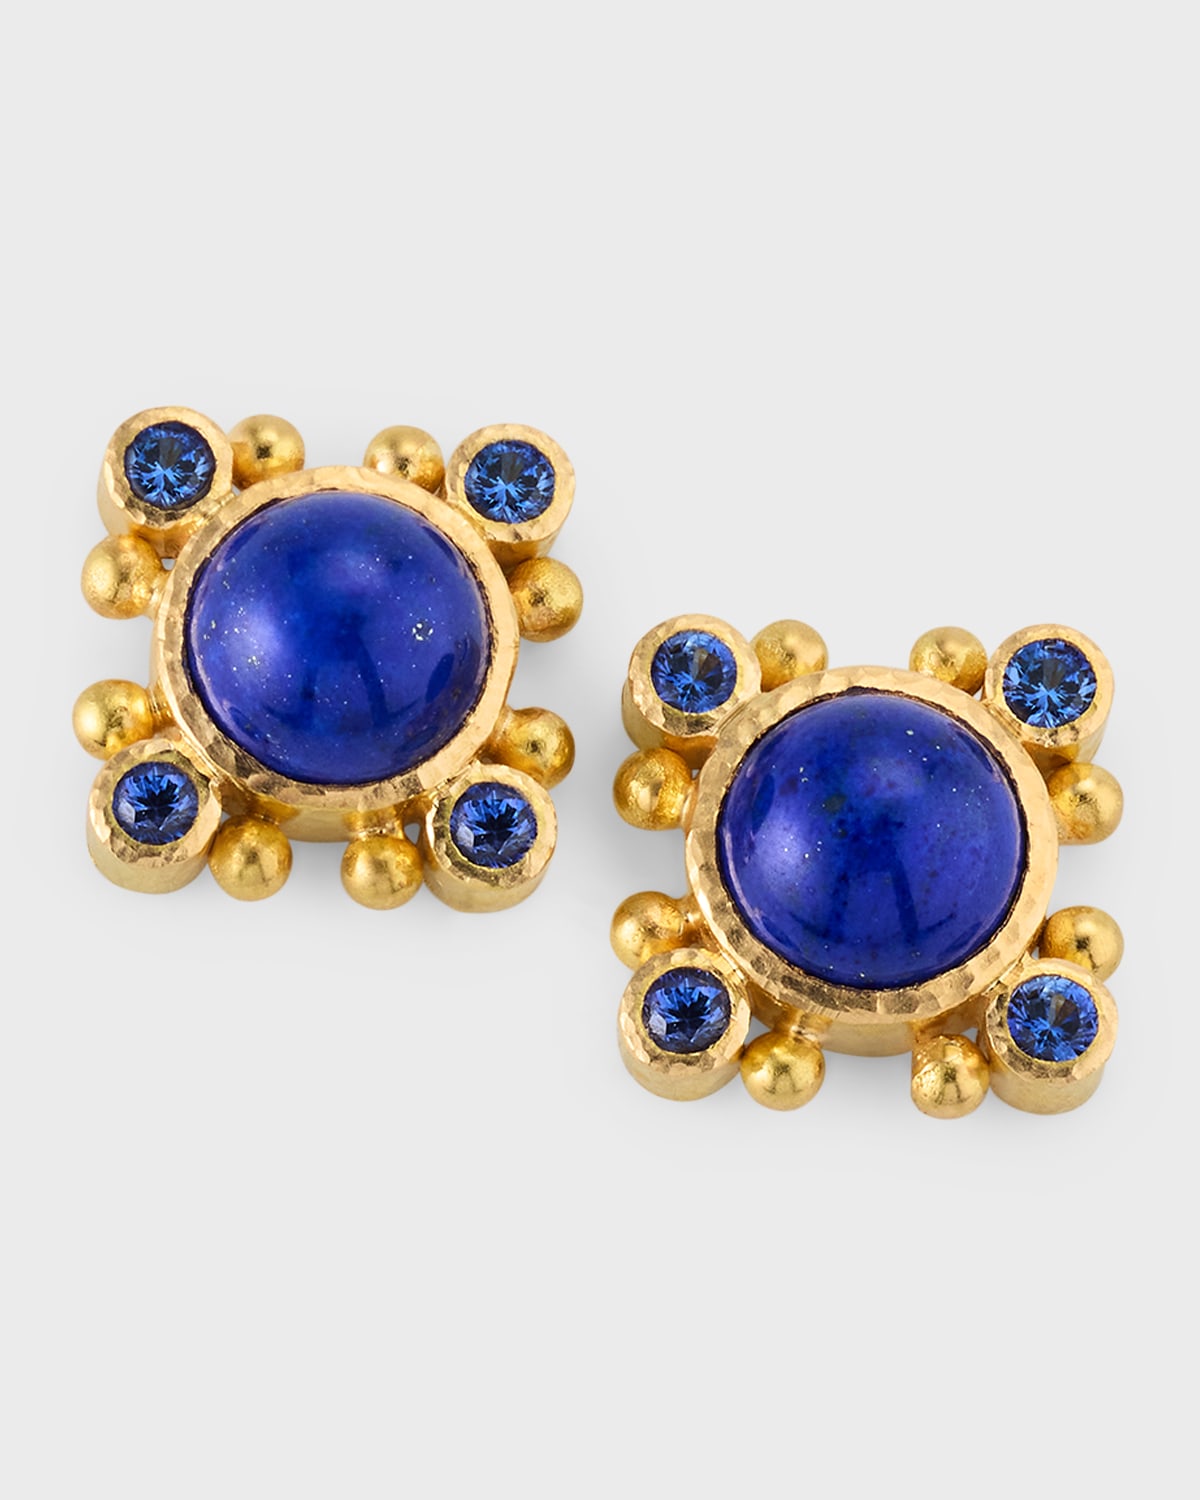 19K Lapis Stud Earrings with Blue Sapphires